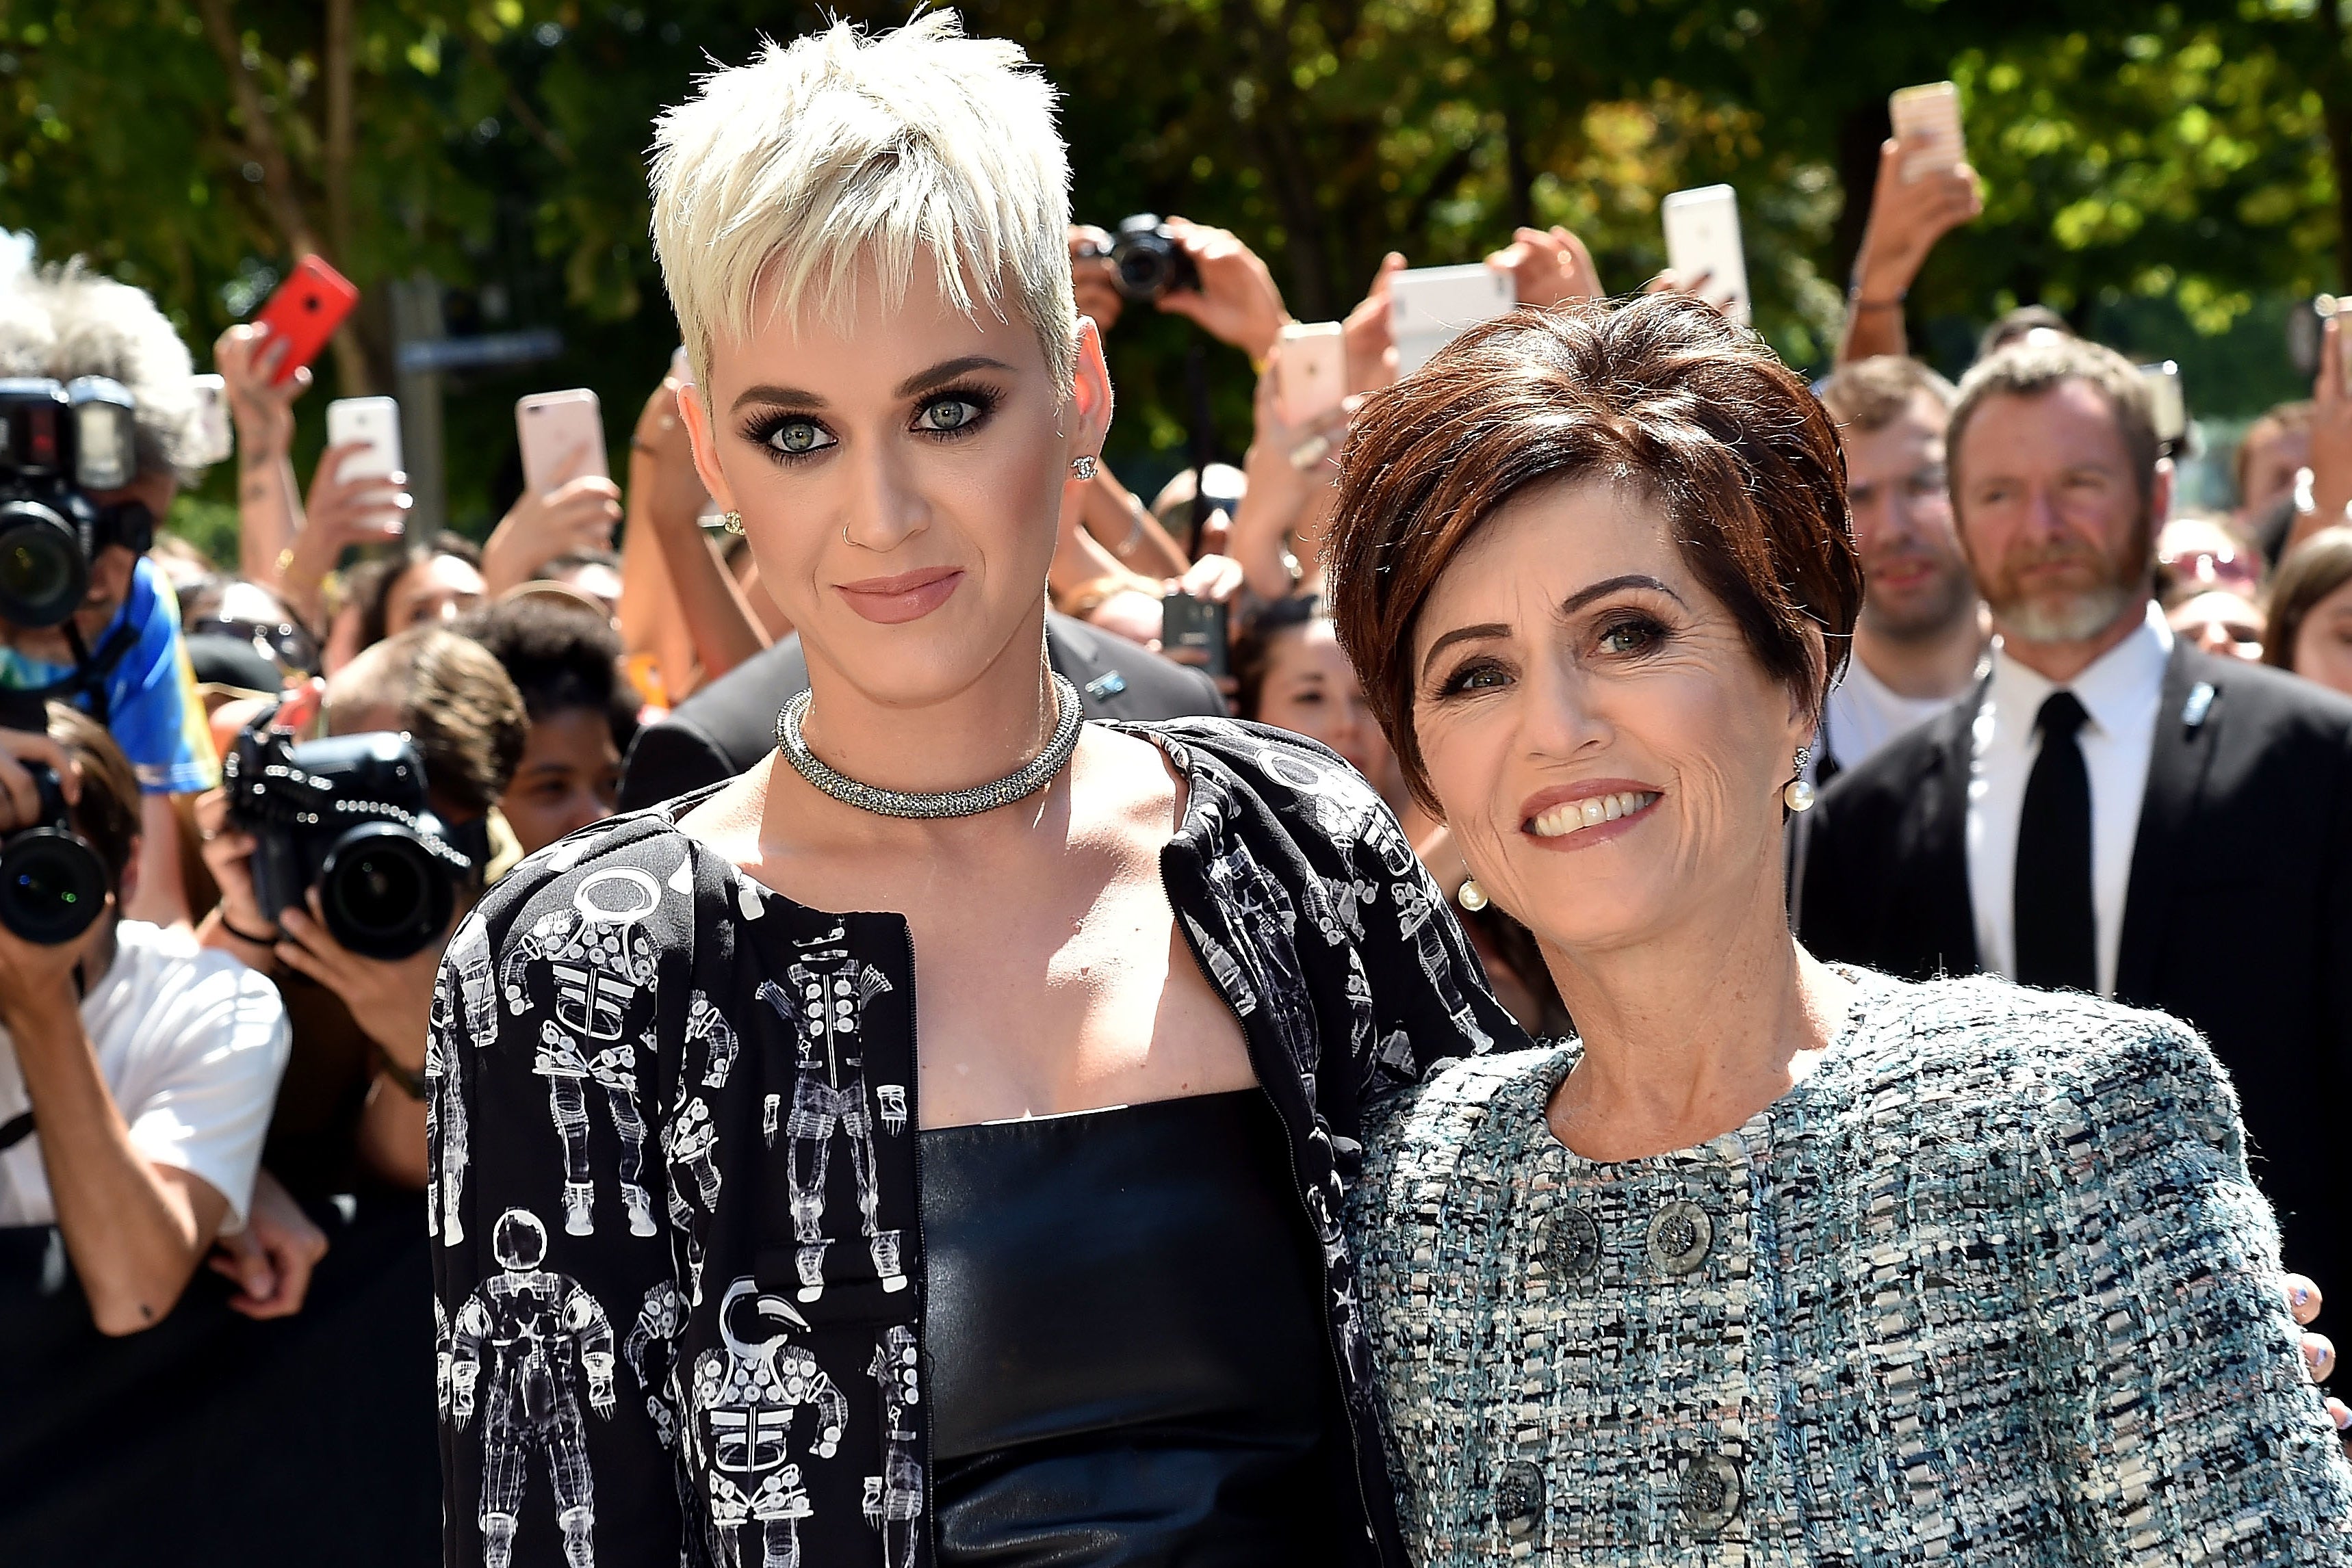 Katy Perry Just Shared The Text Conversation She Had With Her Mom After An AI-Generated Image Of Her At This Year’s Met Gala Went Viral